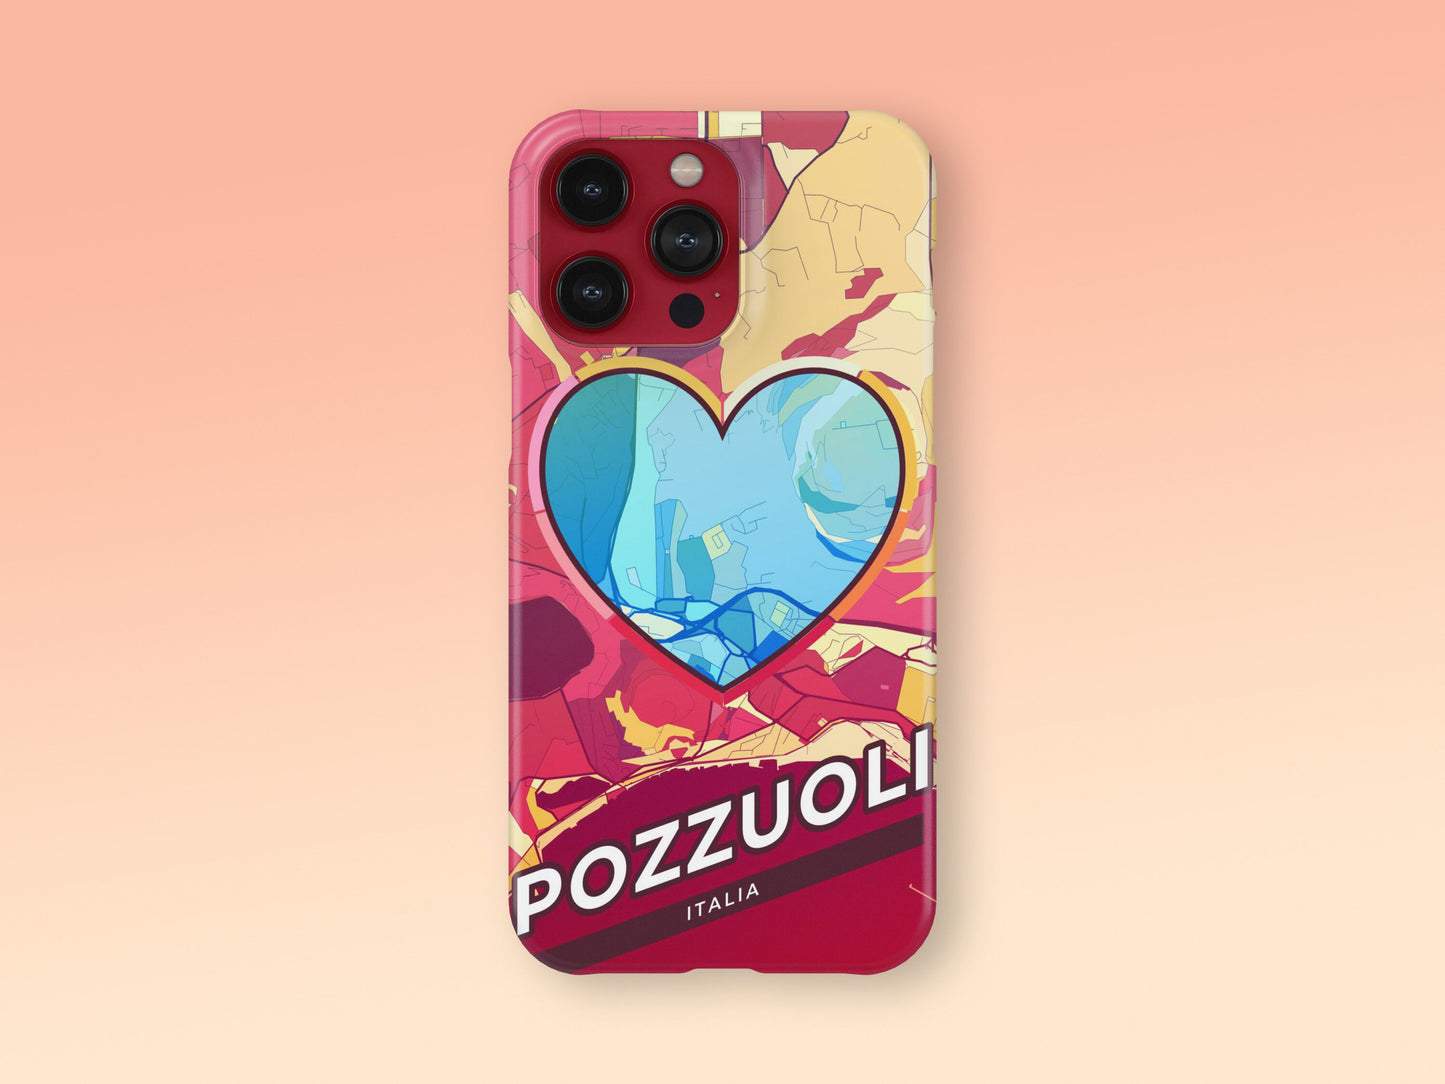 Pozzuoli Italy slim phone case with colorful icon. Birthday, wedding or housewarming gift. Couple match cases. 2